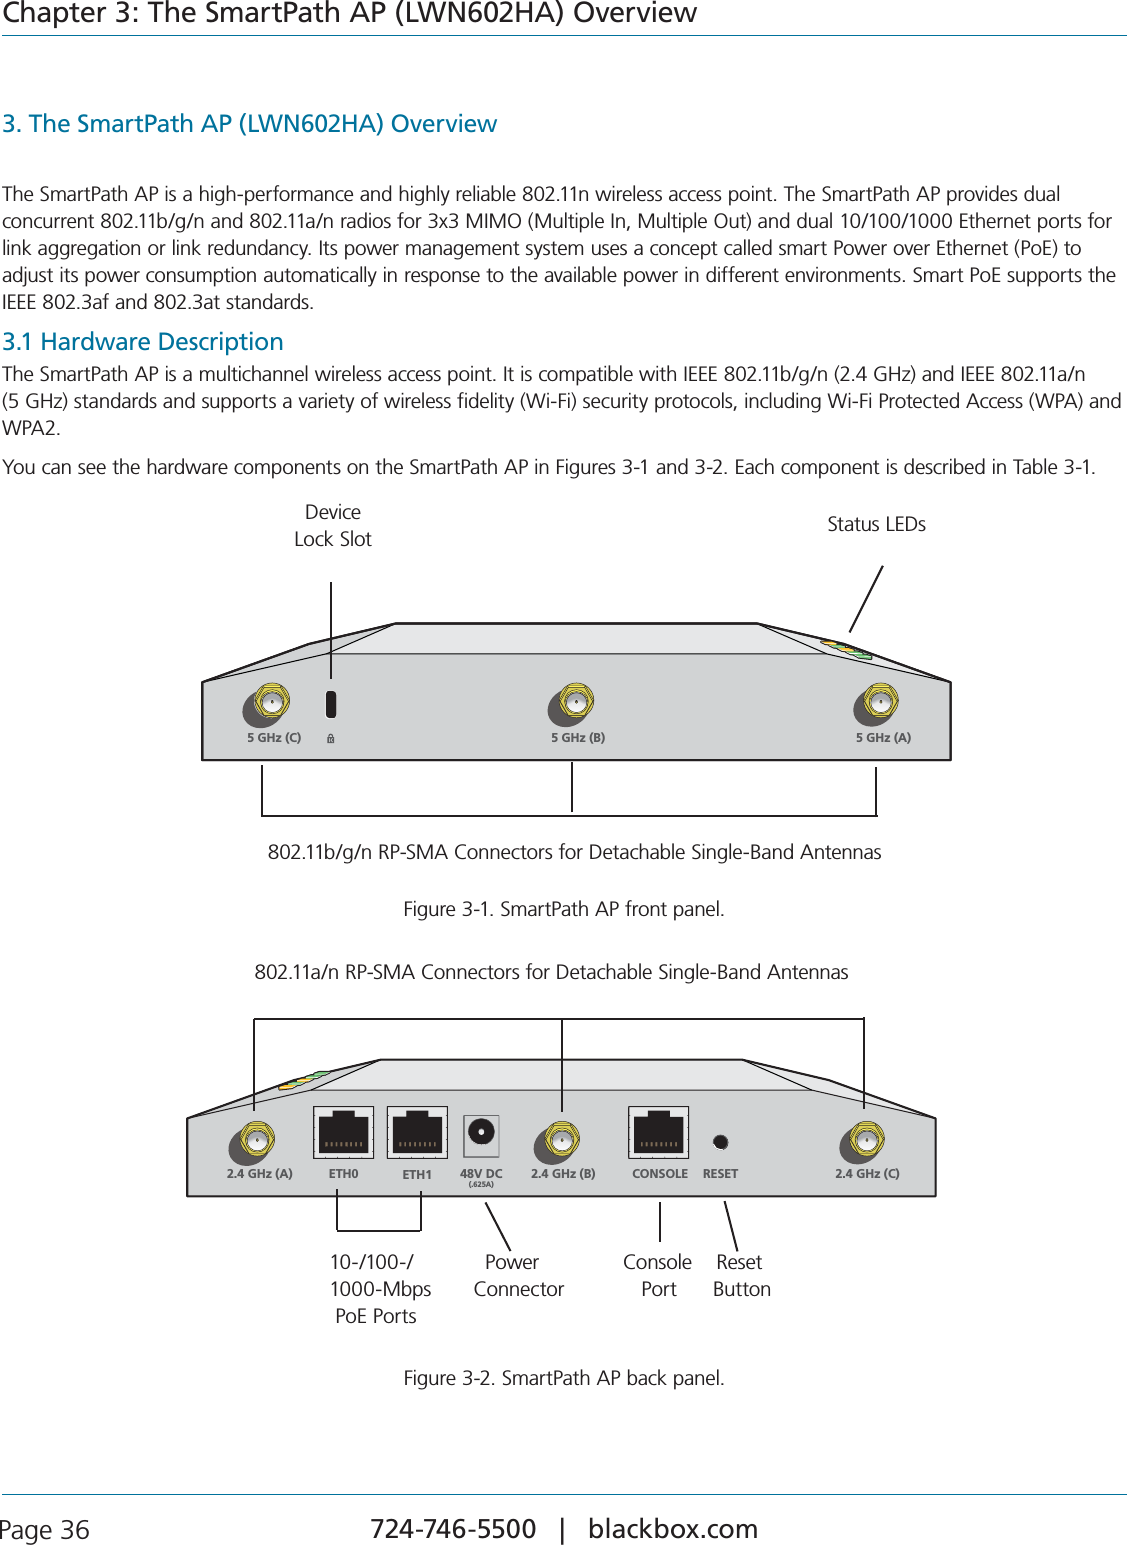 724-746-5500   |   blackbox.com Page 36Chapter 3: The SmartPath AP (LWN602HA) Overview3. The SmartPath AP (LWN602HA) OverviewThe SmartPath AP is a high-performance and highly reliable 802.11n wireless access point. The SmartPath AP provides dual  concurrent 802.11b/g/n and 802.11a/n radios for 3x3 MIMO (Multiple In, Multiple Out) and dual 10/100/1000 Ethernet ports for link aggregation or link redundancy. Its power management system uses a concept called smart Power over Ethernet (PoE) to adjust its power consumption automatically in response to the available power in different environments. Smart PoE supports the IEEE 802.3af and 802.3at standards.3.1 Hardware DescriptionThe SmartPath AP is a multichannel wireless access point. It is compatible with IEEE 802.11b/g/n (2.4 GHz) and IEEE 802.11a/n  (5 GHz) standards and supports a variety of wireless fidelity (Wi-Fi) security protocols, including Wi-Fi Protected Access (WPA) and WPA2.You can see the hardware components on the SmartPath AP in Figures 3-1 and 3-2. Each component is described in Table 3-1.5 GHz (A)5 GHz (B)5 GHz (C)802.11b/g/n RP-SMA Connectors for Detachable Single-Band AntennasDevice  Lock Slot Status LEDsFigure 3-1. SmartPath AP front panel.2.4 GHz (A) 2.4 GHz (B) 2.4 GHz (C)ETH0 ETH1 48V DC(.625A)CONSOLE RESET802.11a/n RP-SMA Connectors for Detachable Single-Band Antennas    10-/100-/          Power      Console    Reset      1000-Mbps       Connector        Port      Button      PoE PortsFigure 3-2. SmartPath AP back panel.